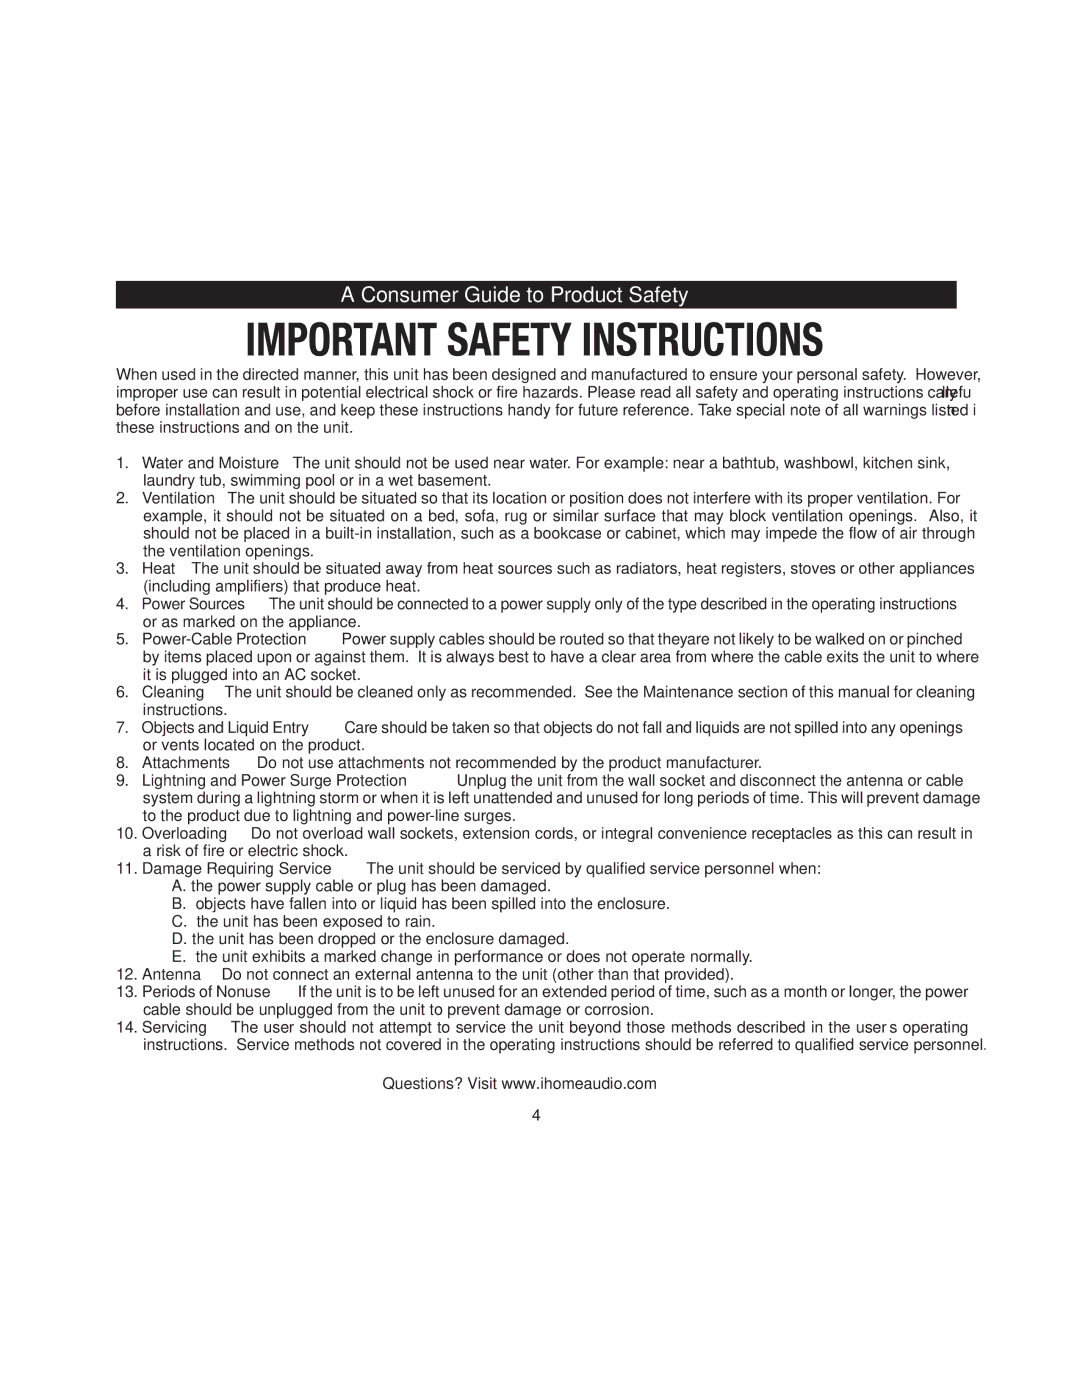 iHome iH150 manual Consumer Guide to Product Safety 